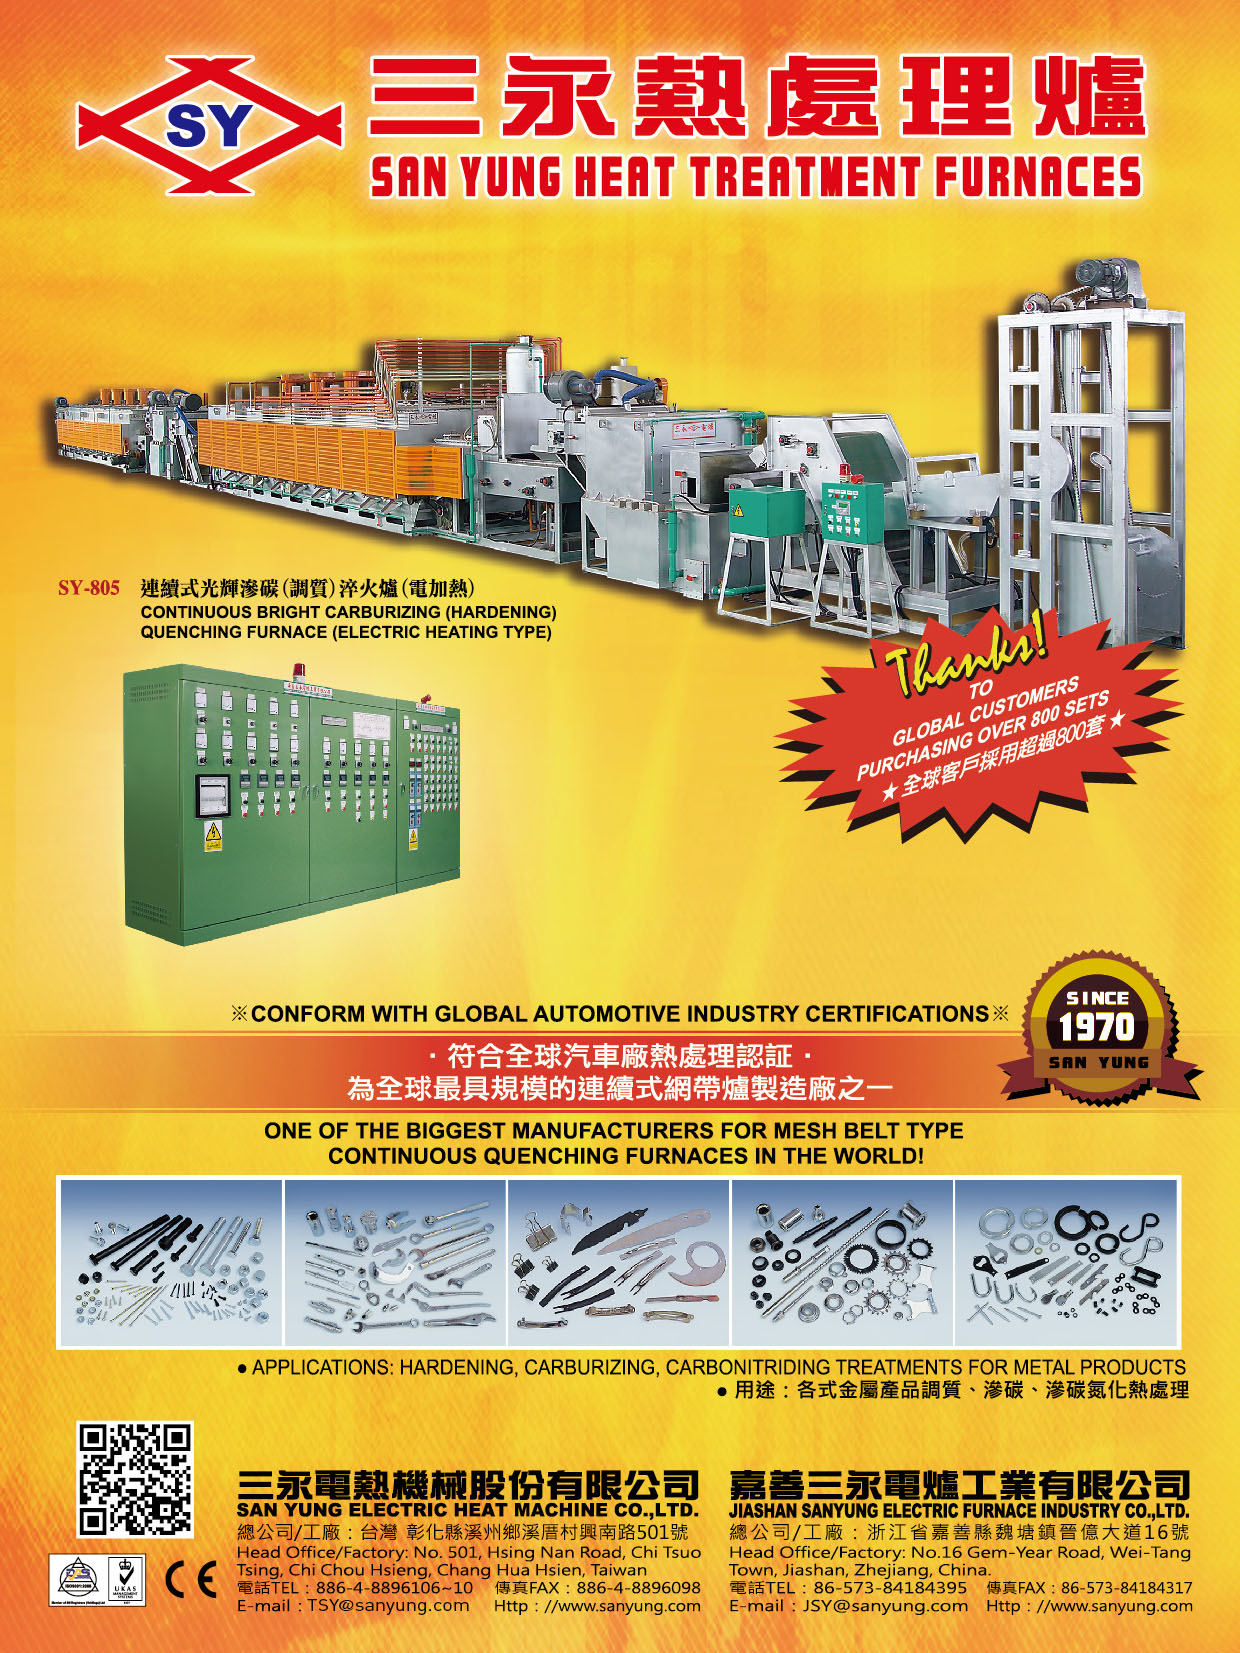 SAN YUNG ELECTRIC HEAT MACHINE CO., LTD.  , Continuous Bright Carburizing (Hardening) Quenching Furnace (Electric Heating Type) , Quenching Furnace